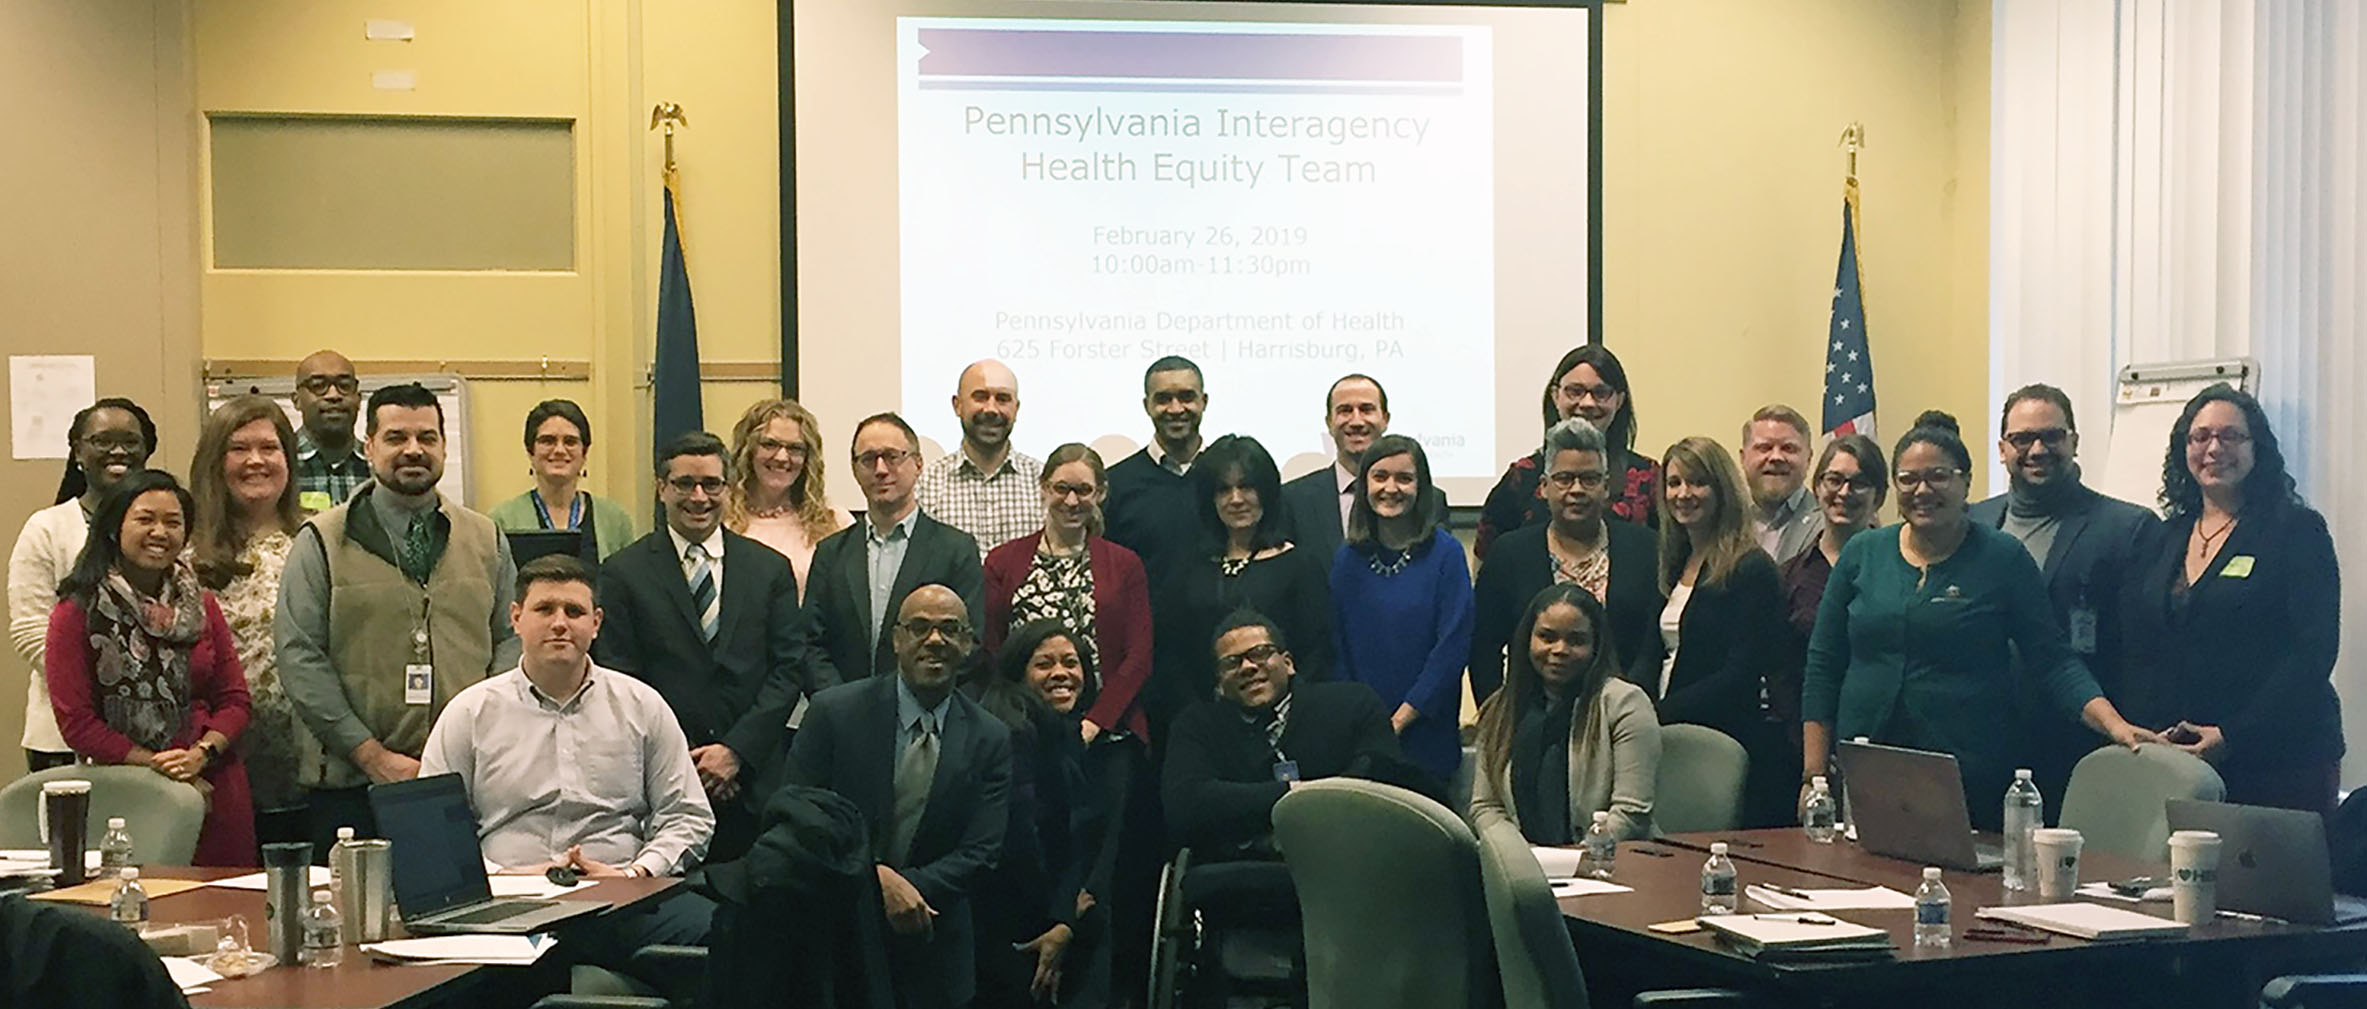 Photo of the large group of people on the Health Equity Team standing at the front of the room during a conference.